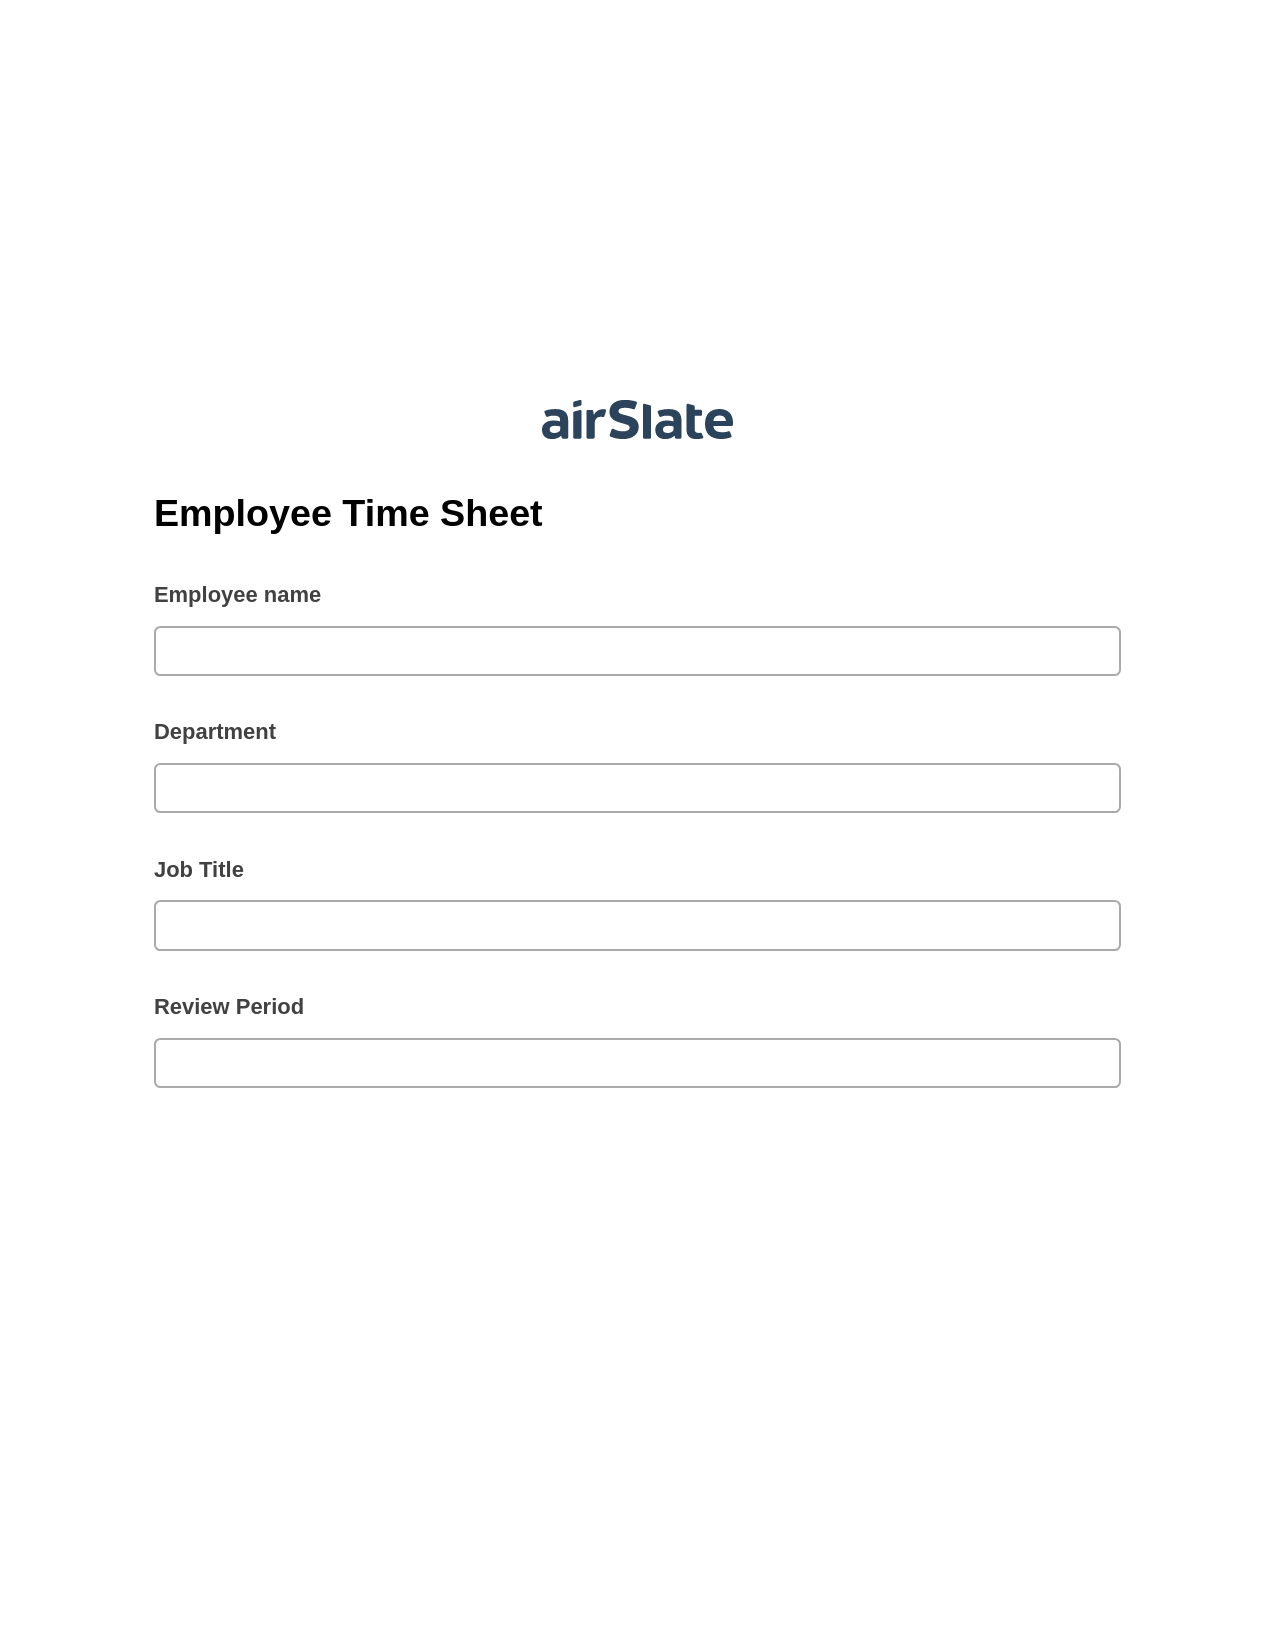 Multirole Employee Time Sheet Pre-fill from MS Dynamics 365 Records, Update Audit Trail Bot, Export to Google Sheet Bot